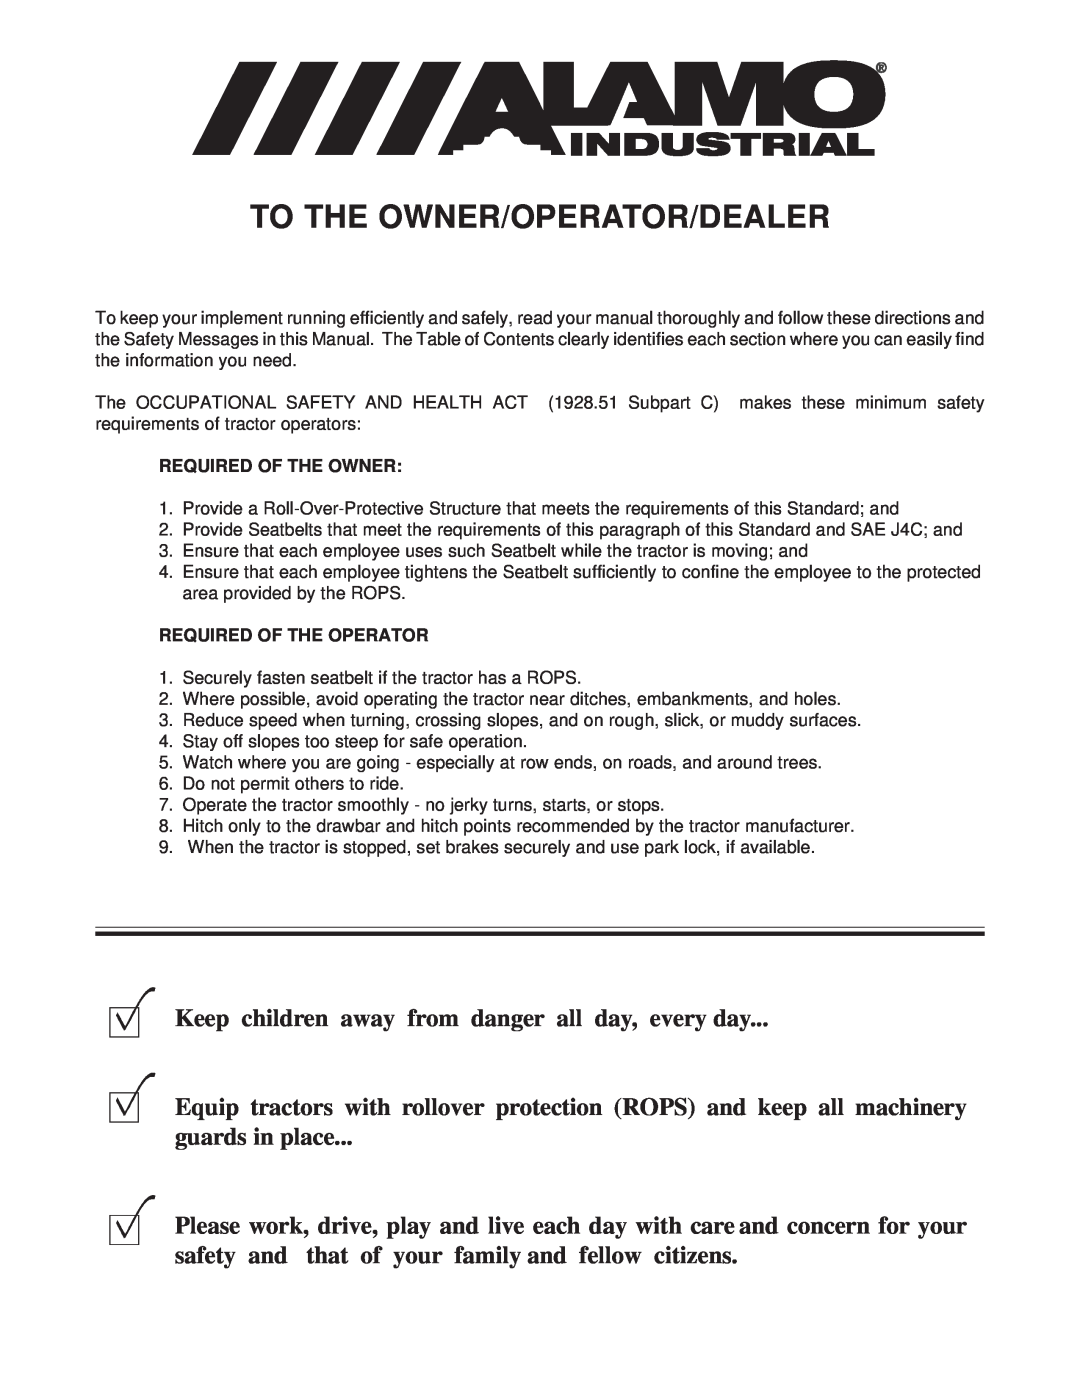 Alamo FC-P-0002 manual To The Owner/Operator/Dealer, Keep children away from danger all day, every day, guards in place 